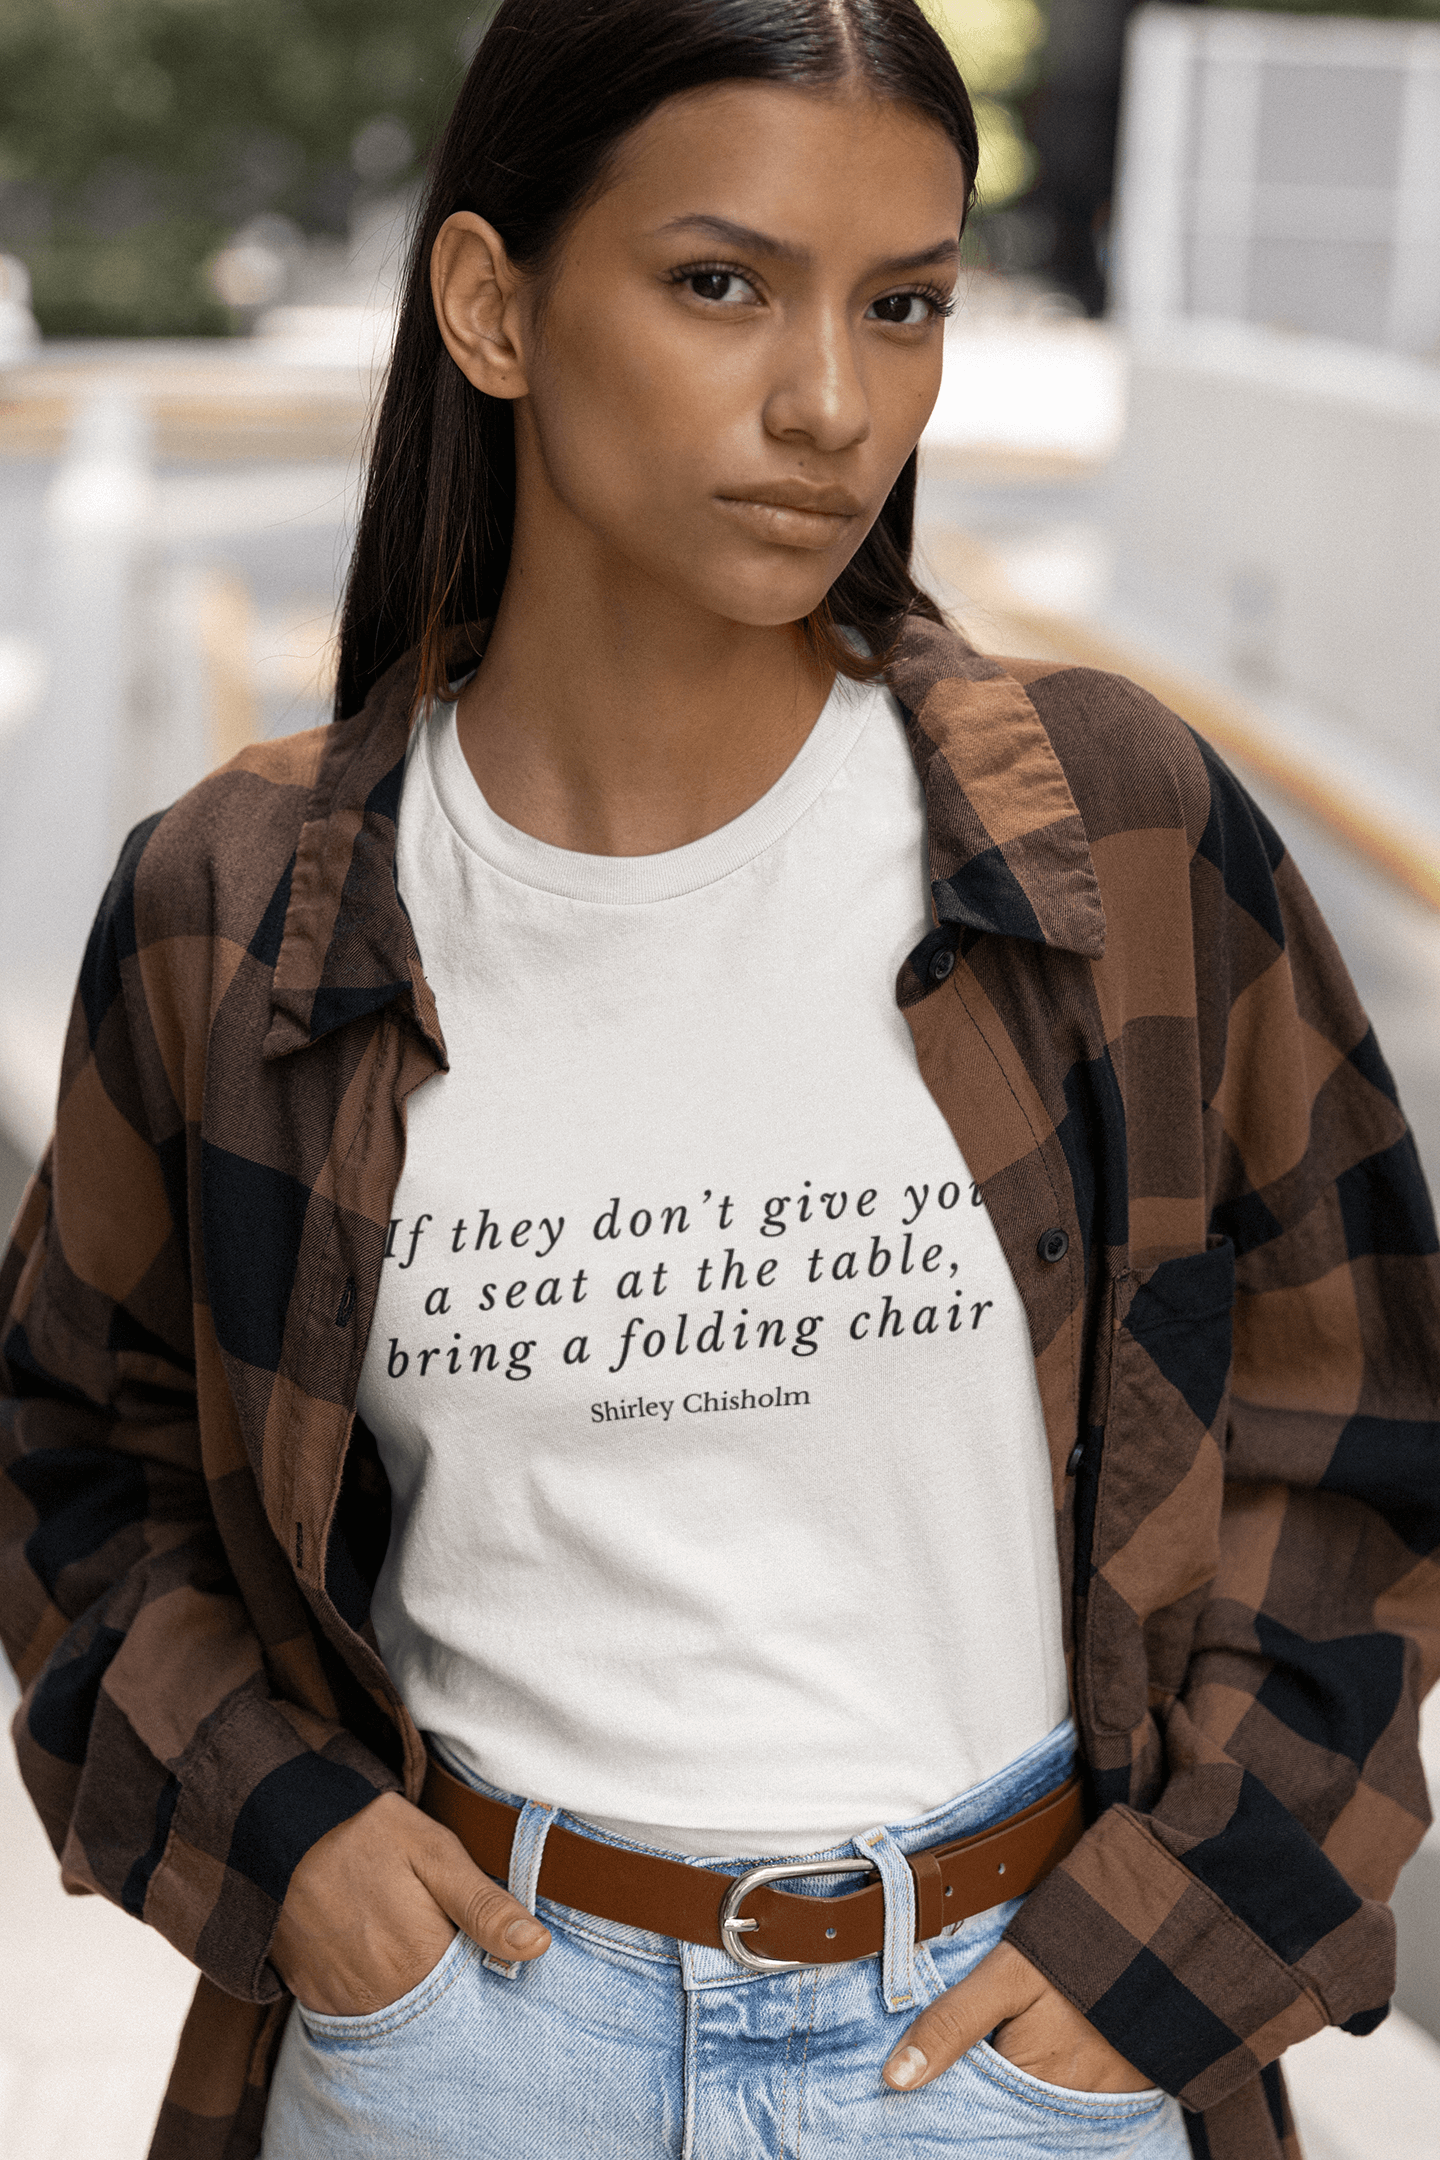 If They Don't Give You a Seat at the Table, Bring a Folding Chair Shirley Chisholm T-Shirt - Bad Perfectionist Co.